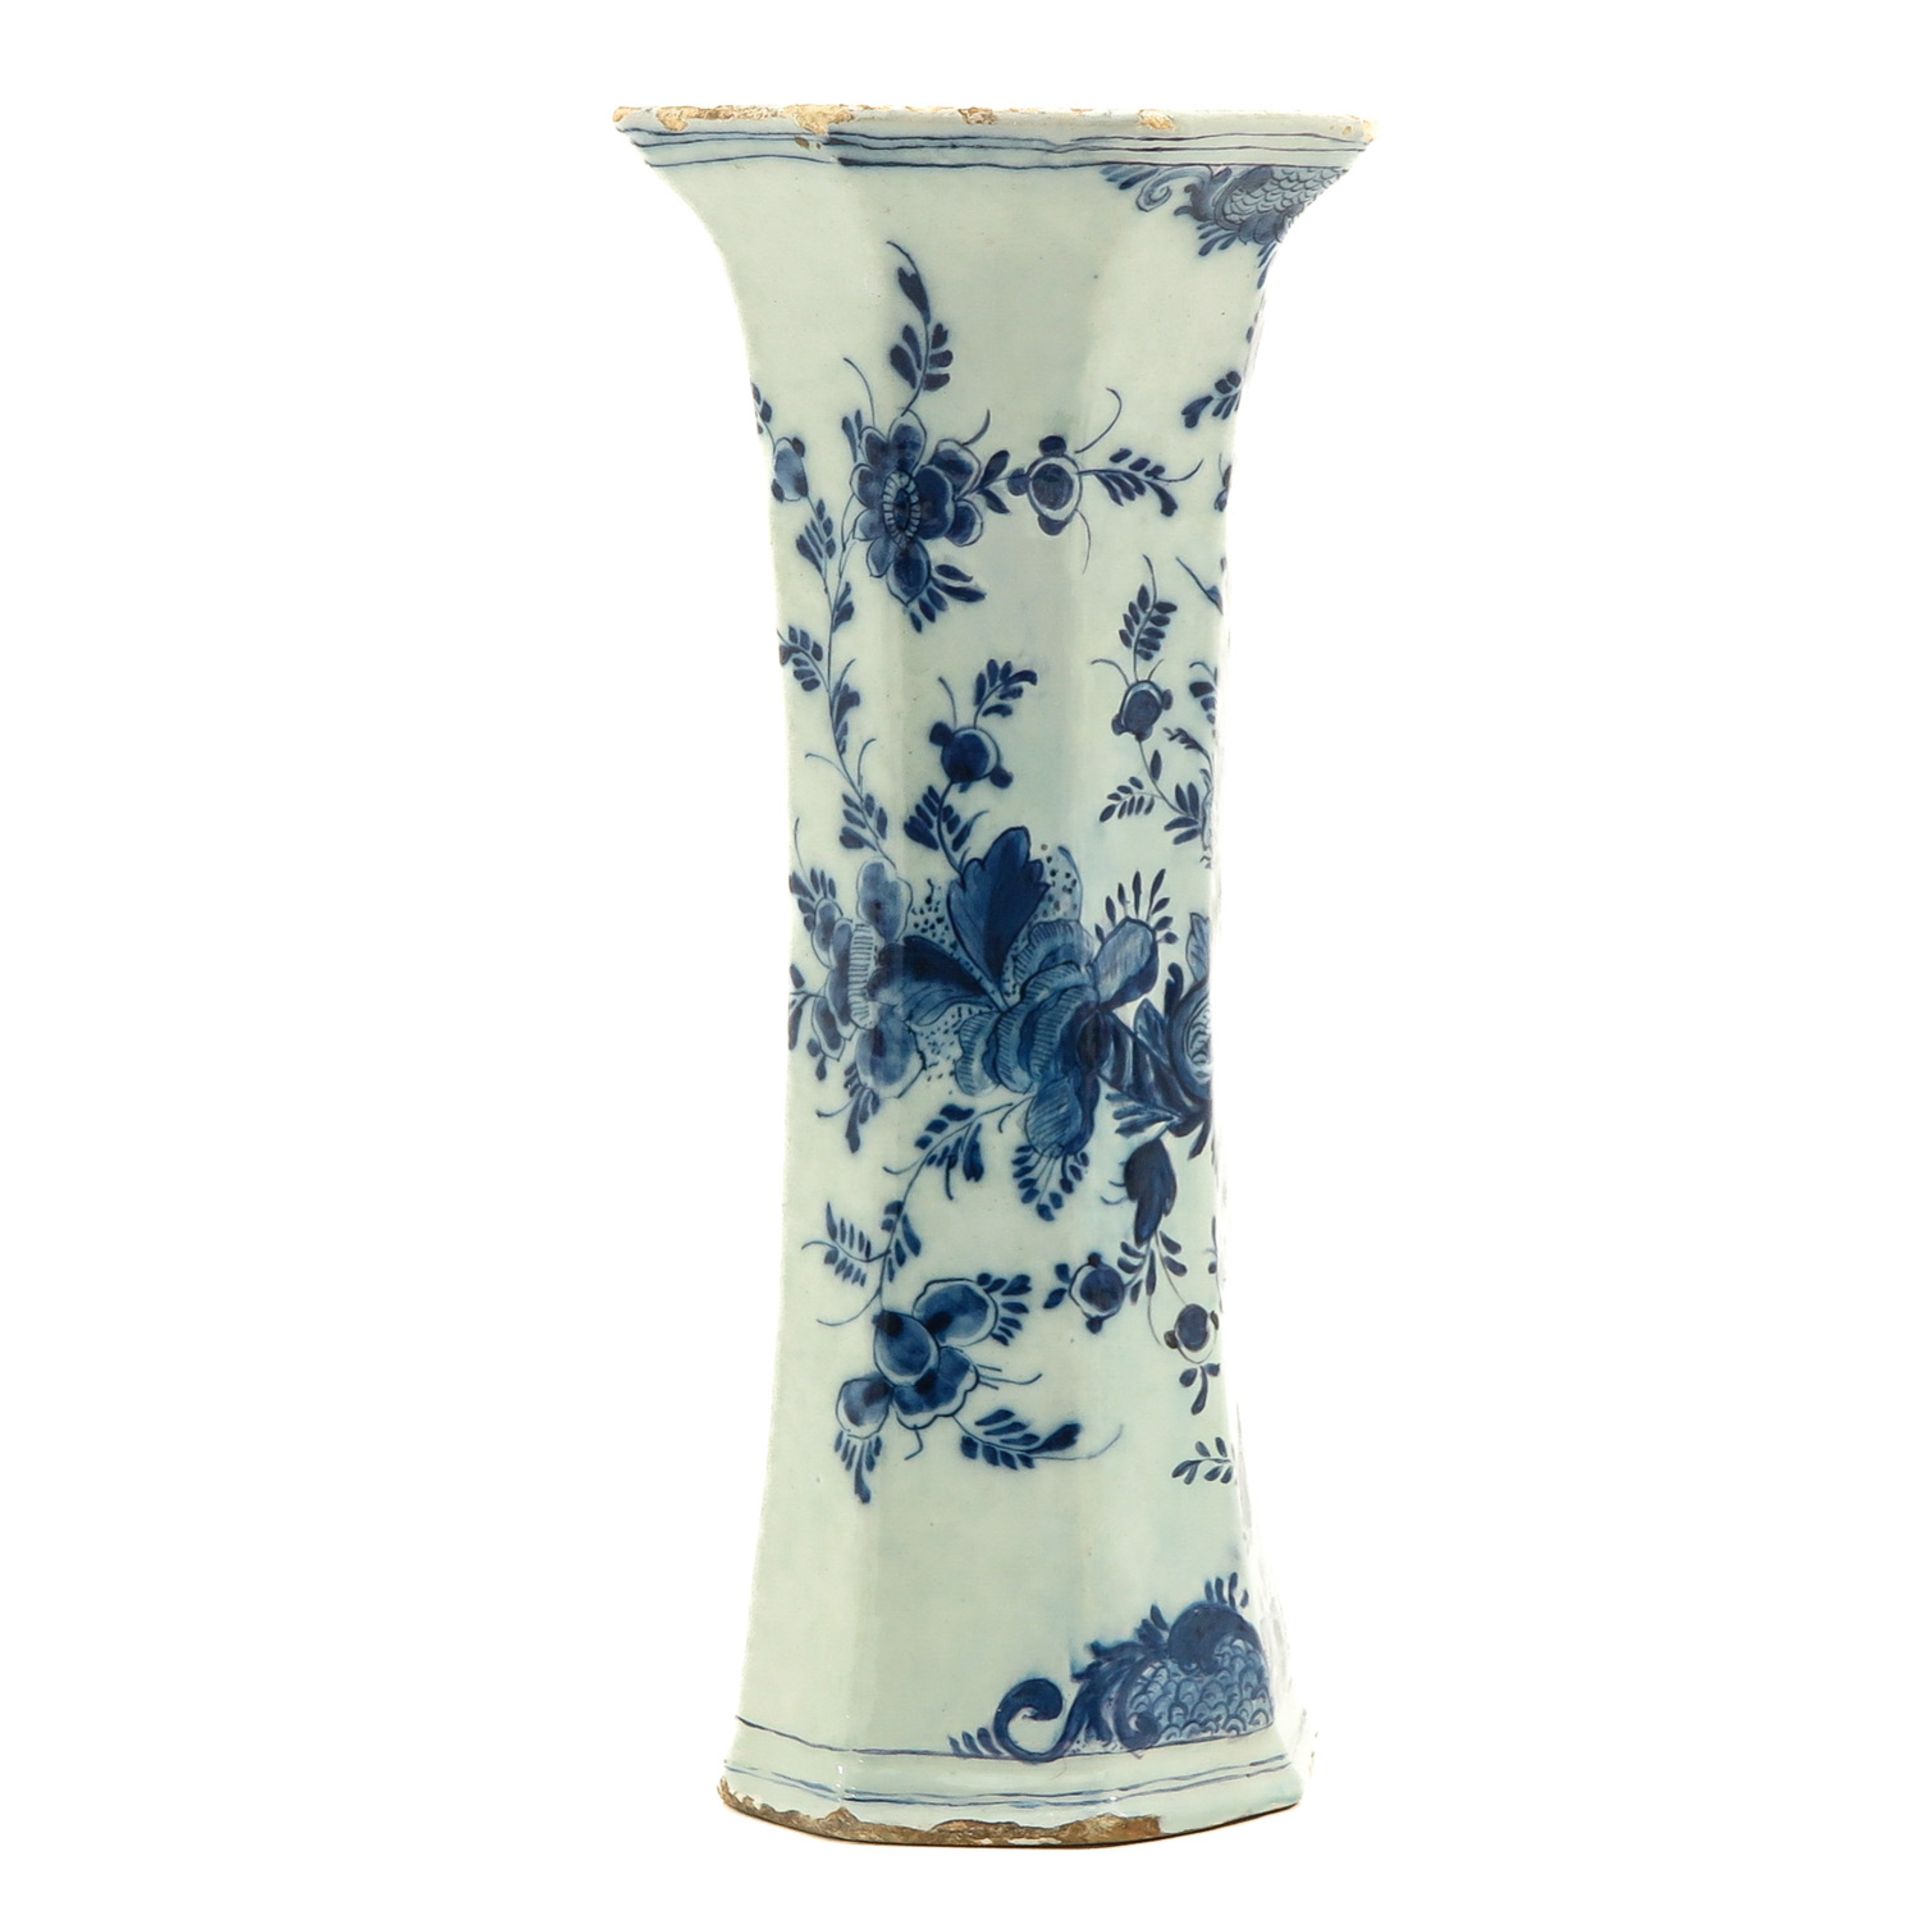 An 18th Century Delft Vase - Image 4 of 8